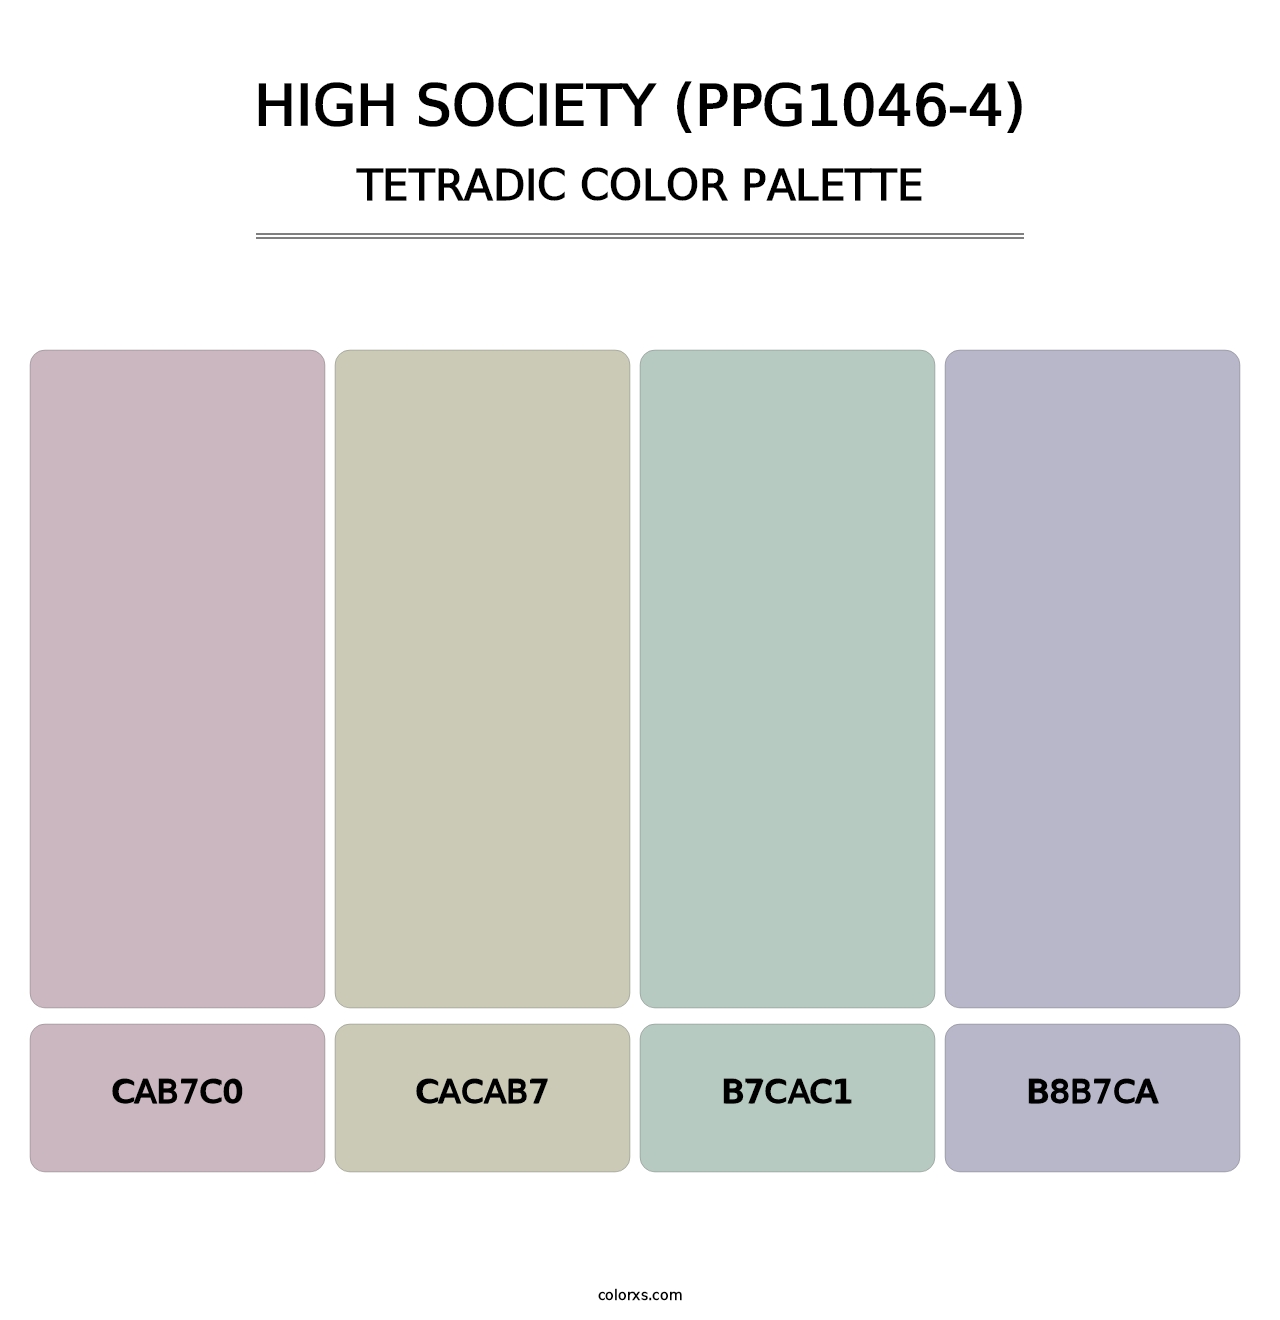 High Society (PPG1046-4) - Tetradic Color Palette